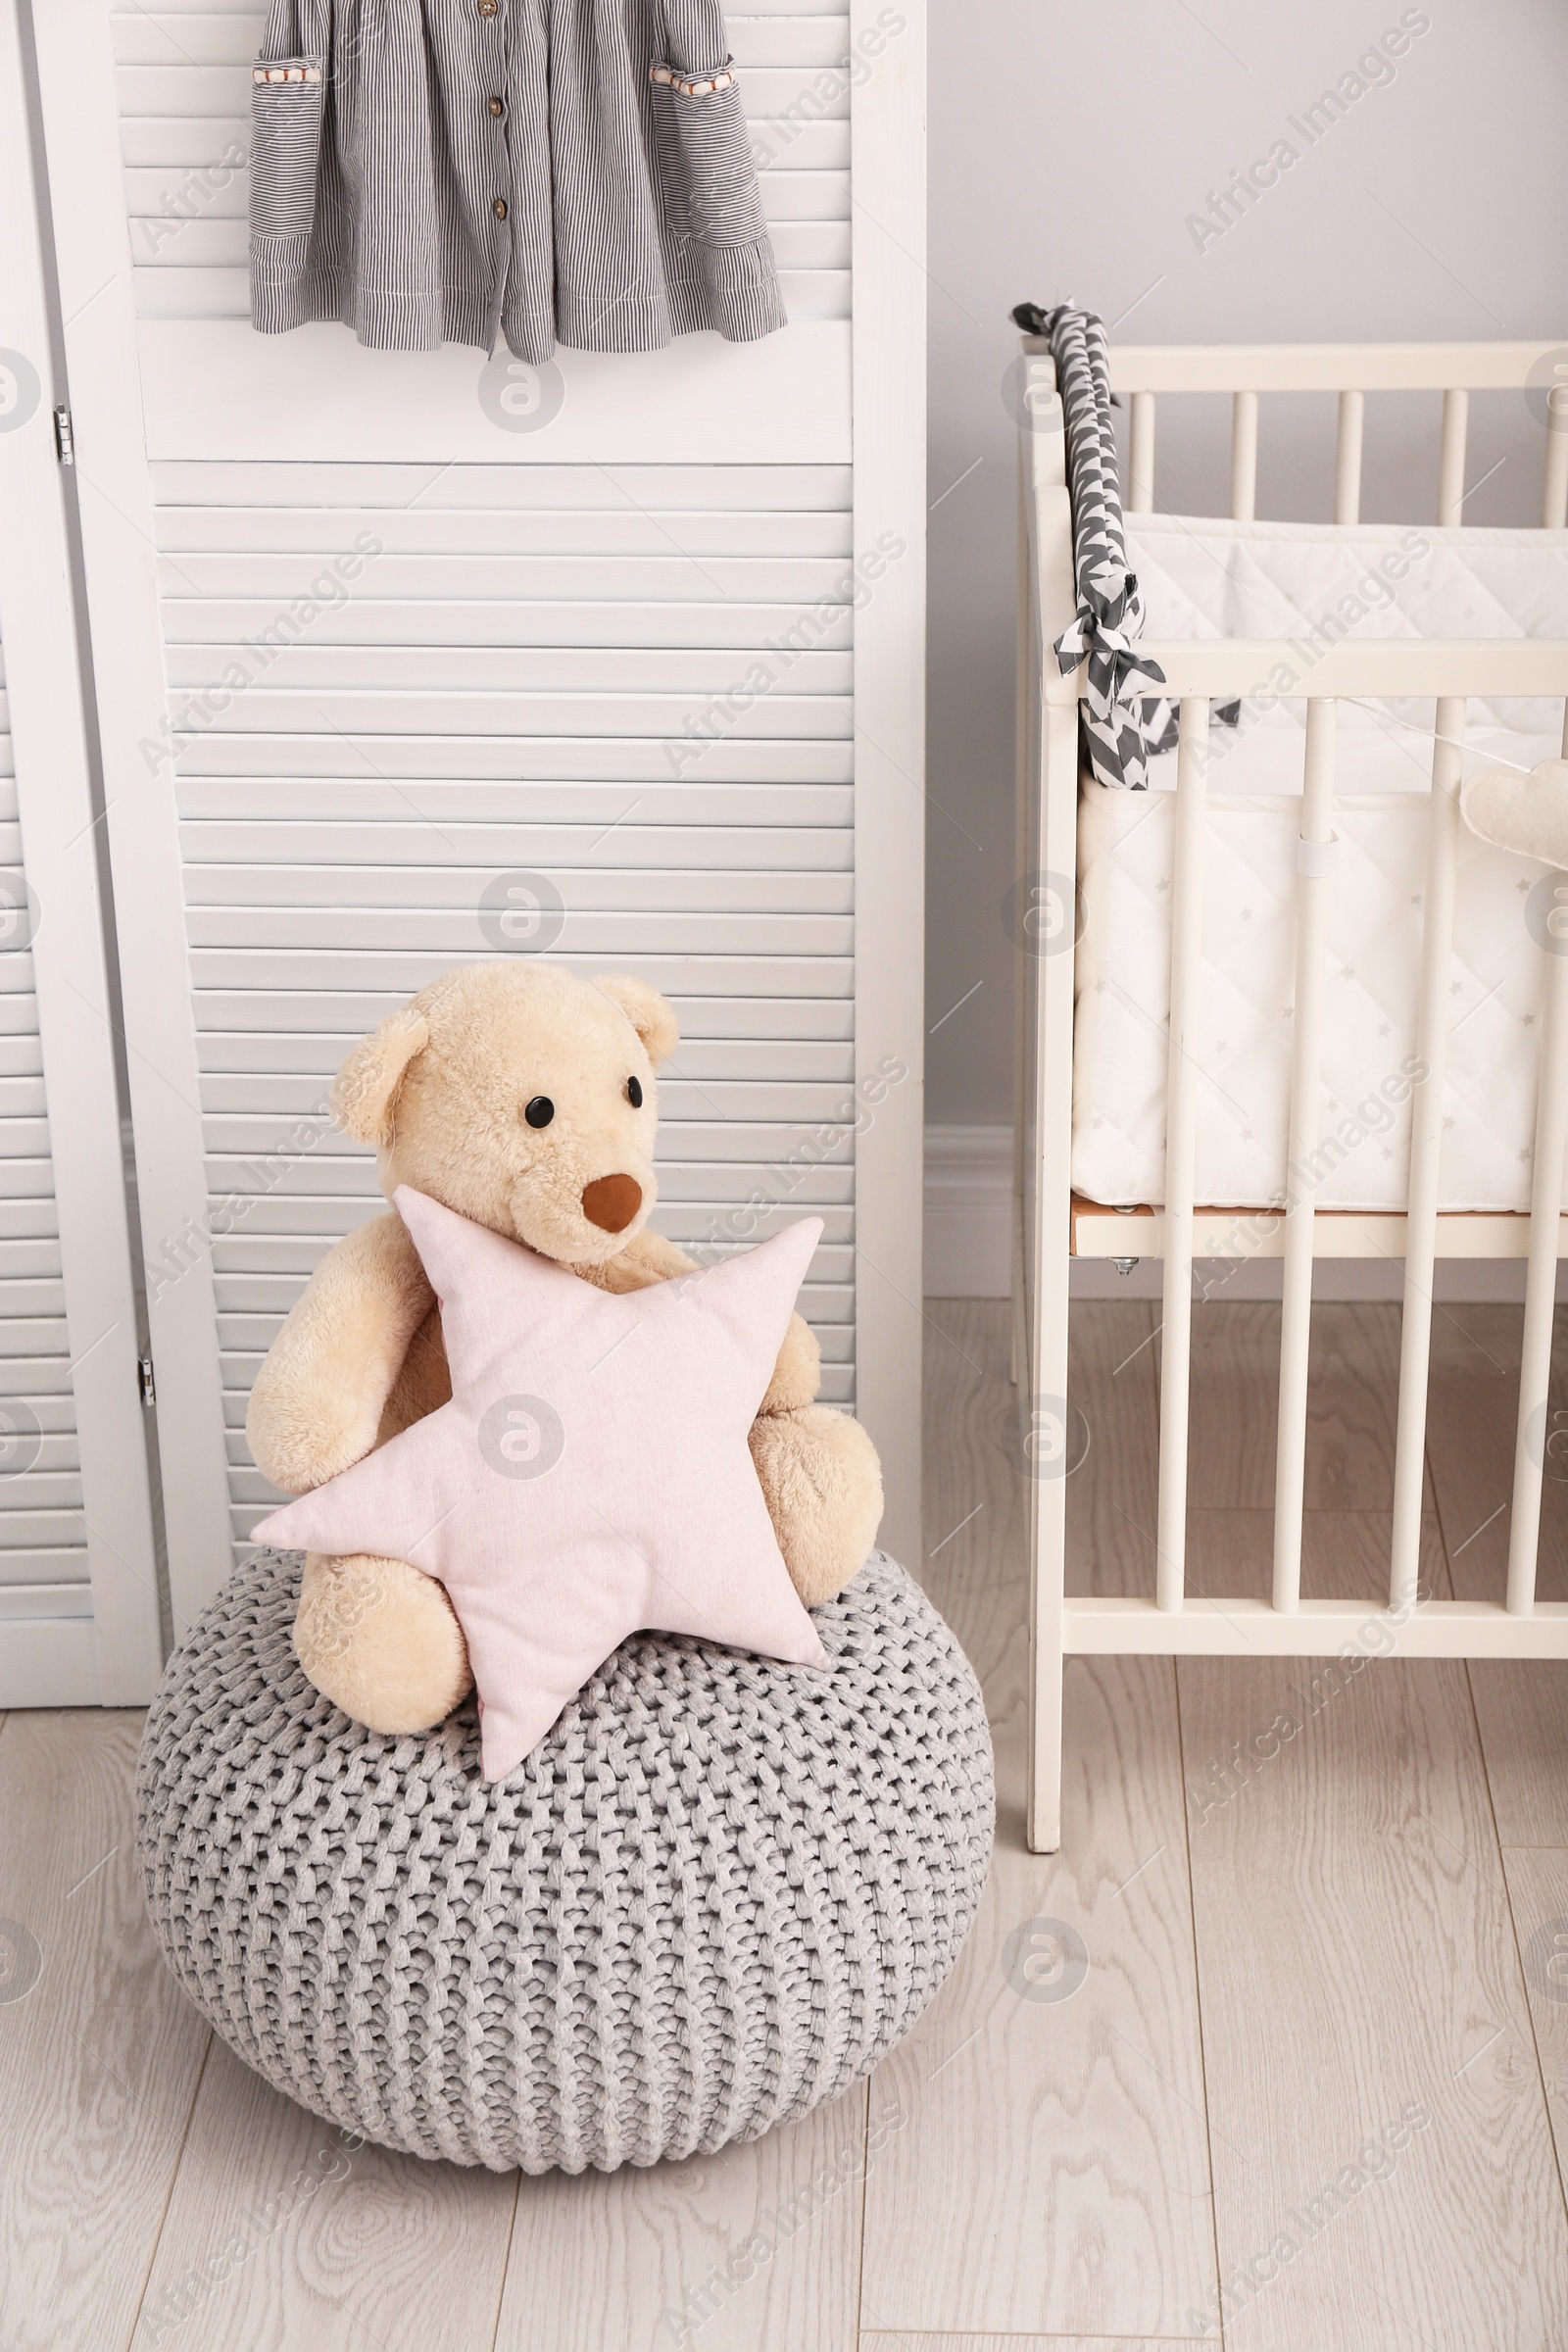 Photo of Stylish baby room interior with toys and comfortable crib